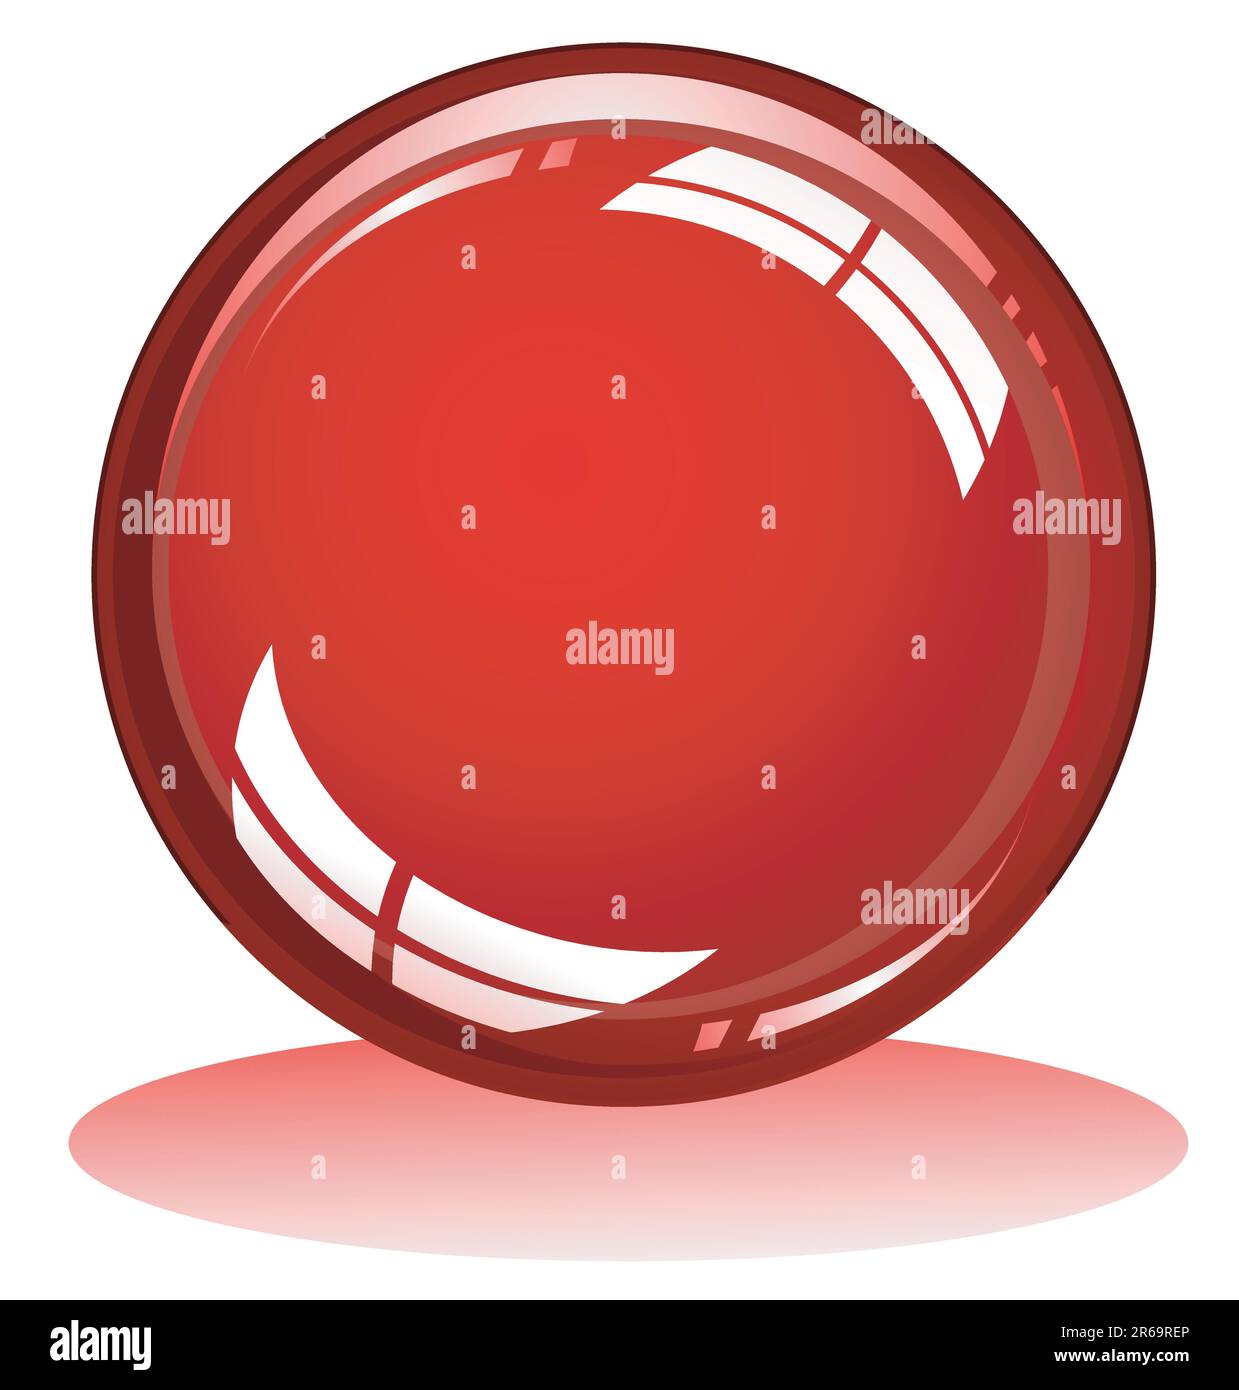 High detailes reflective glossy sphere Stock Vector